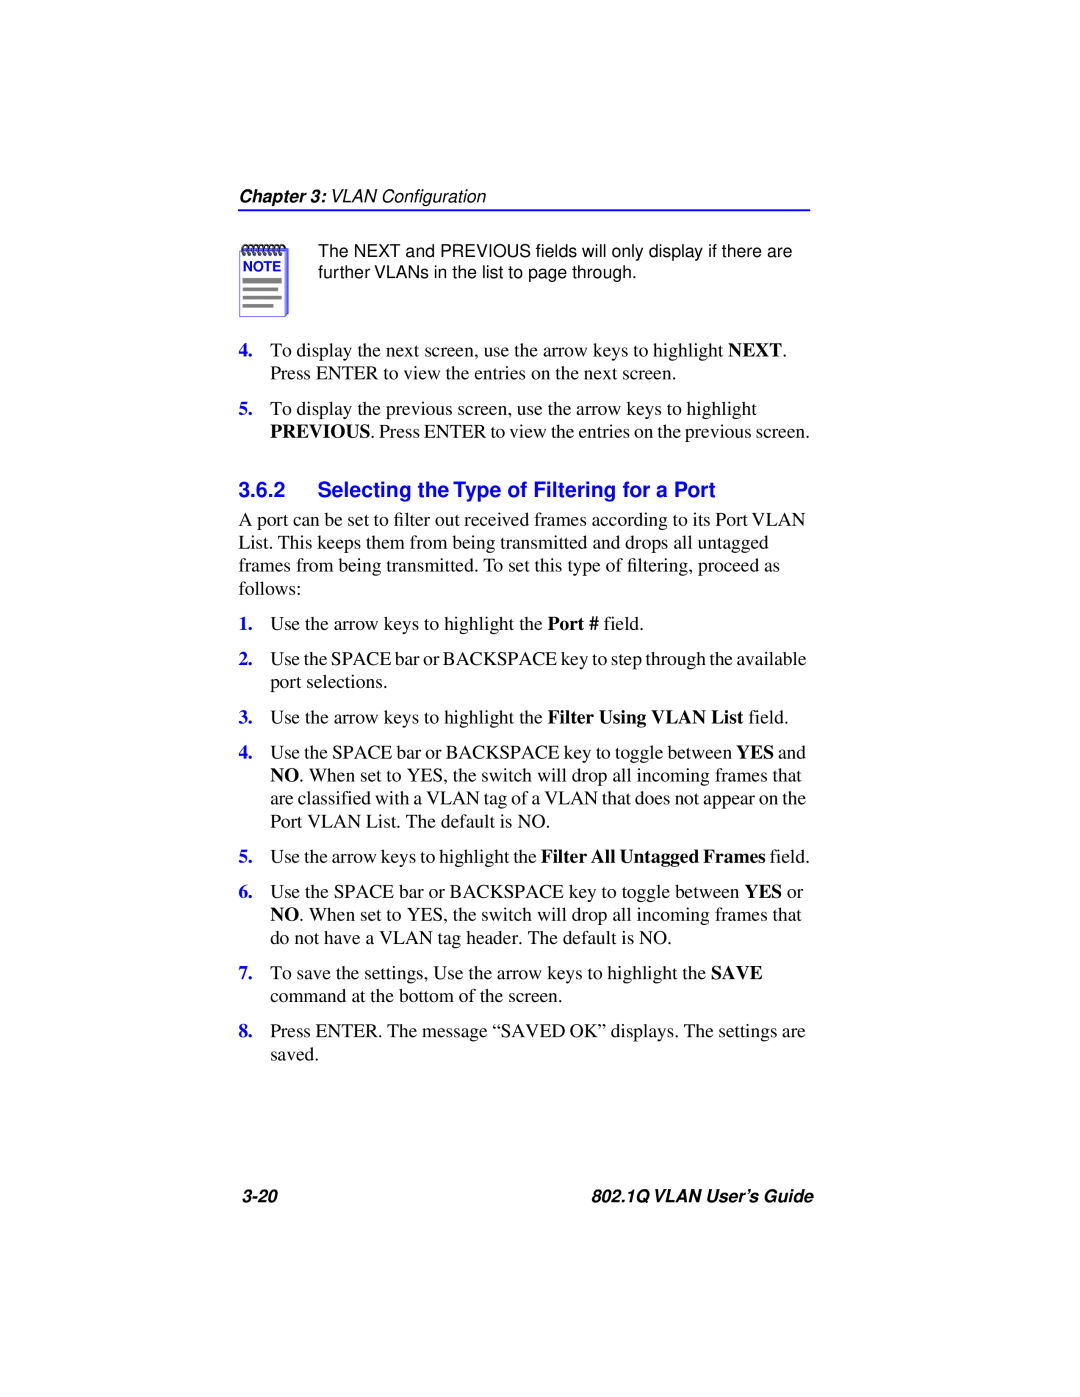 Cabletron Systems 802.1Q manual Selecting the Type of Filtering for a Port 